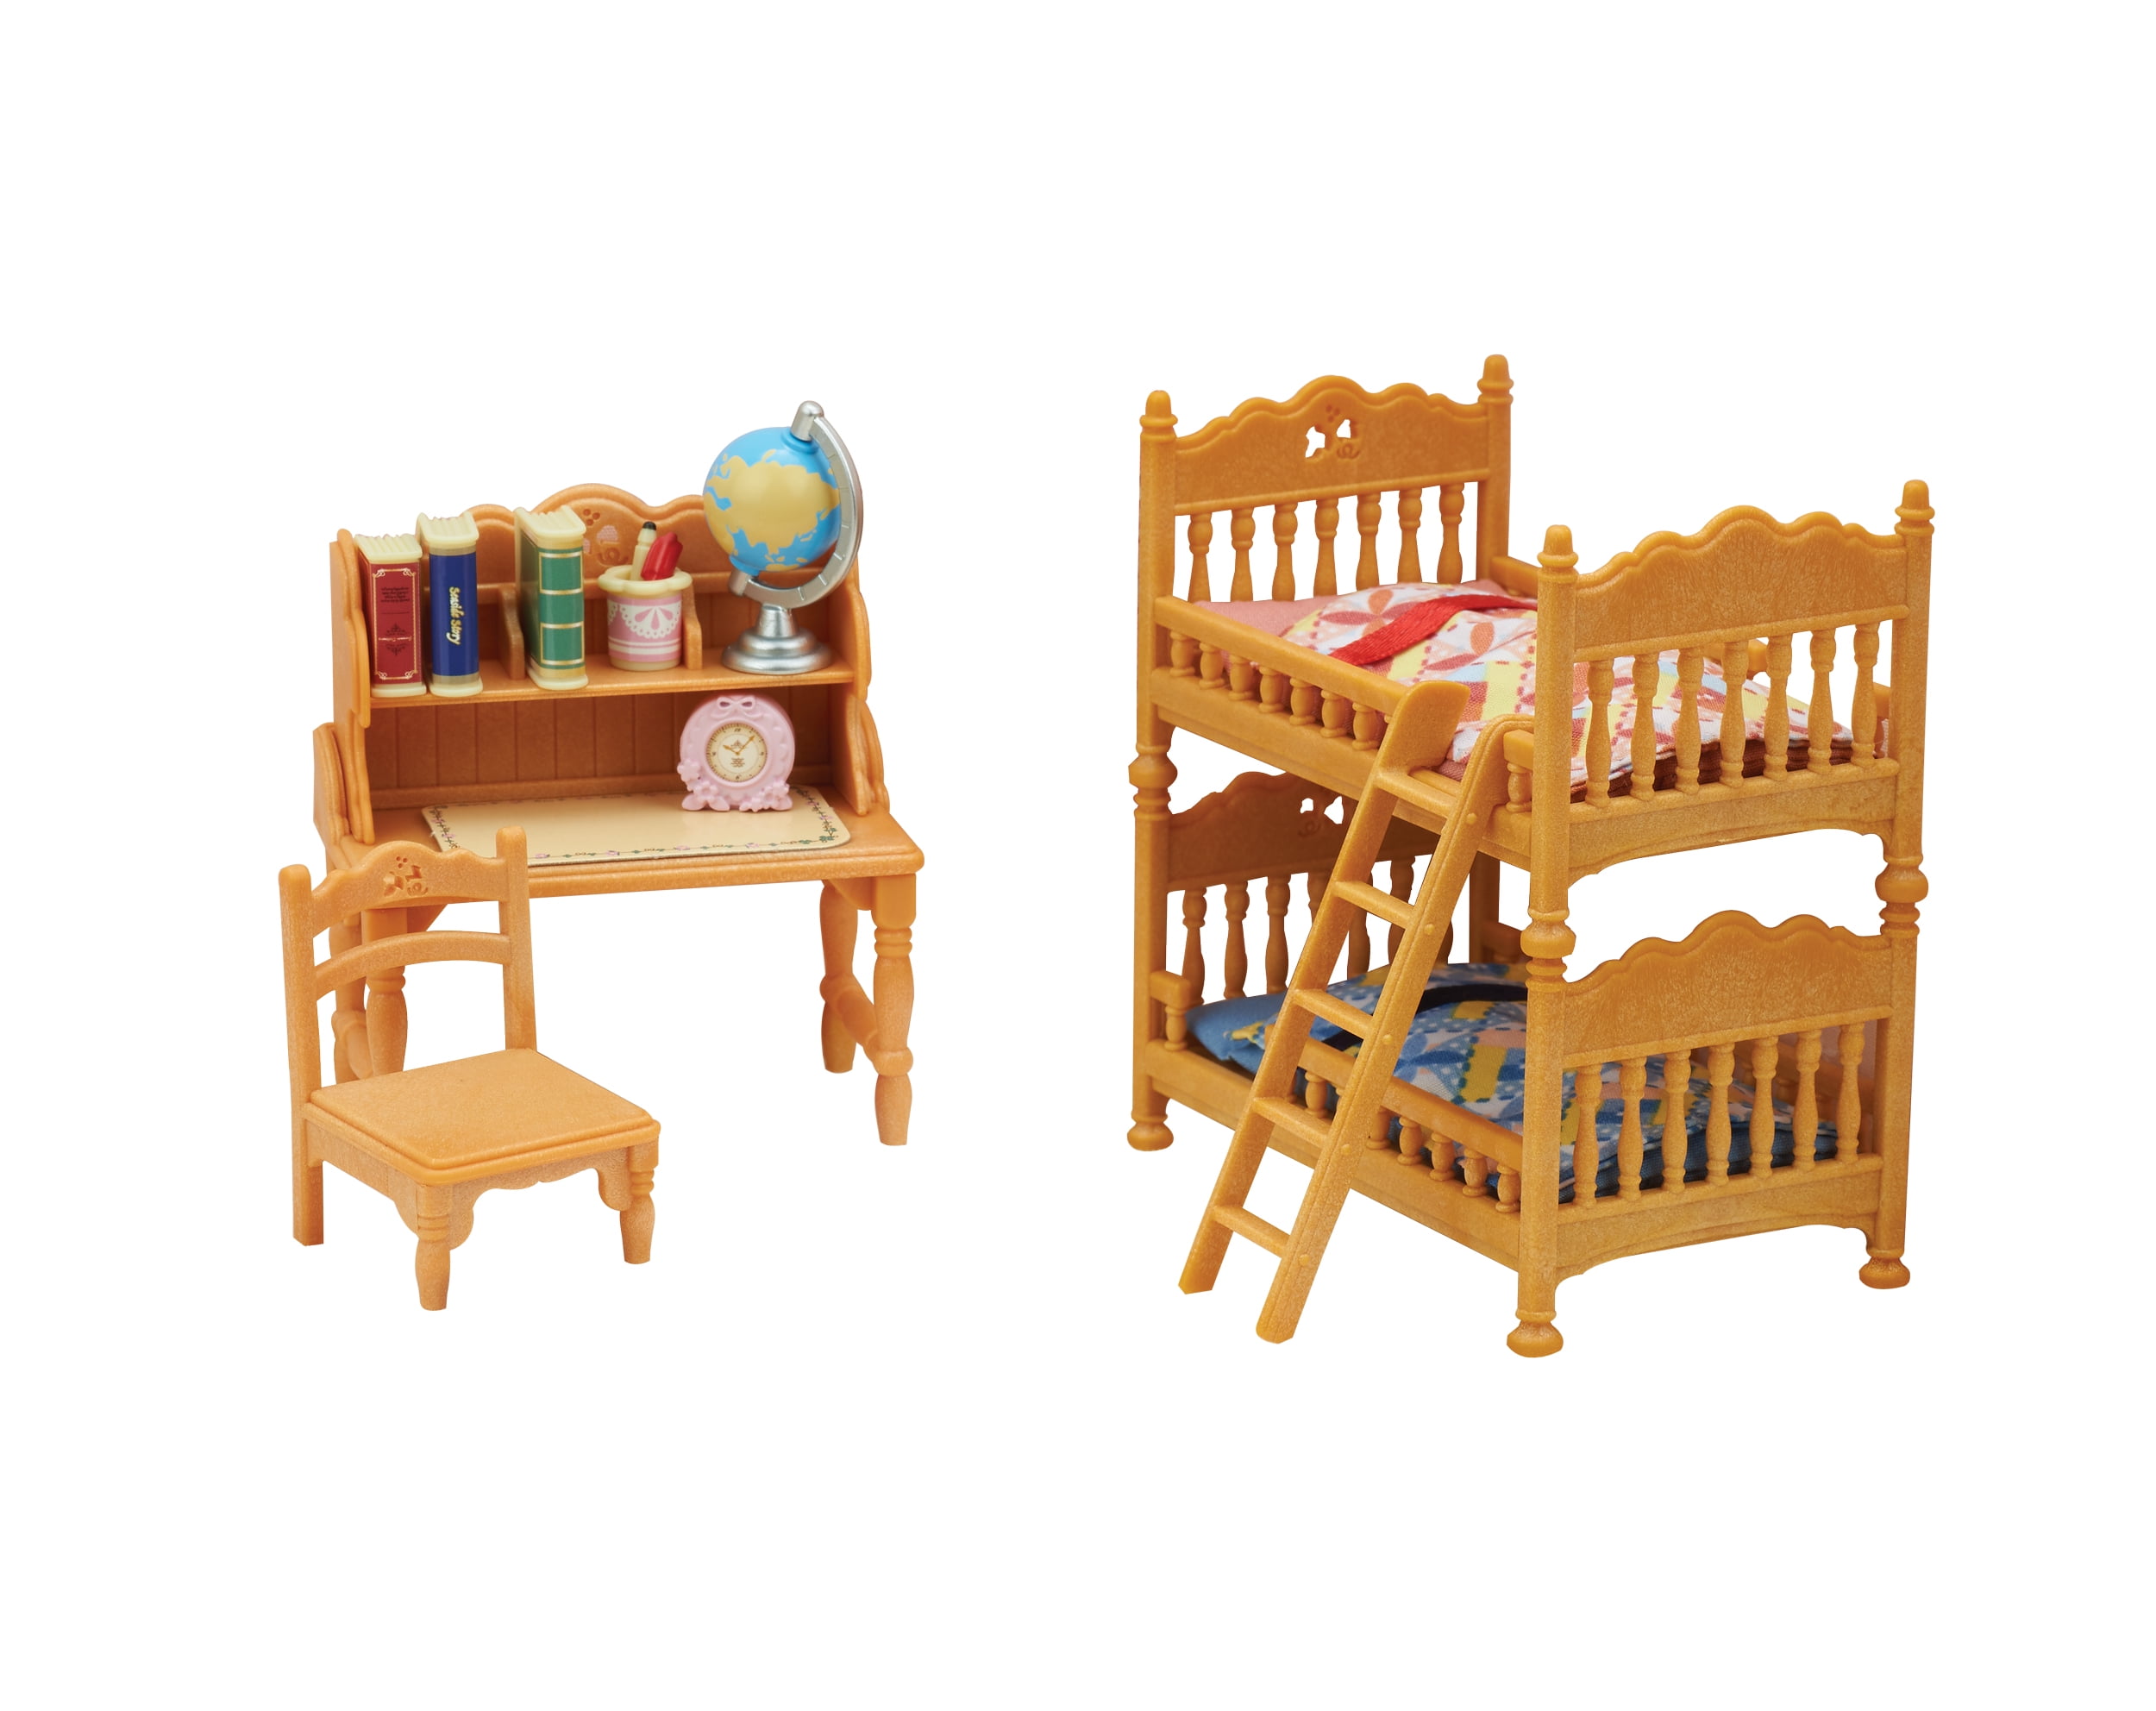 Calico Critters Bunk Beds Com, Calico Critters Bunk Beds